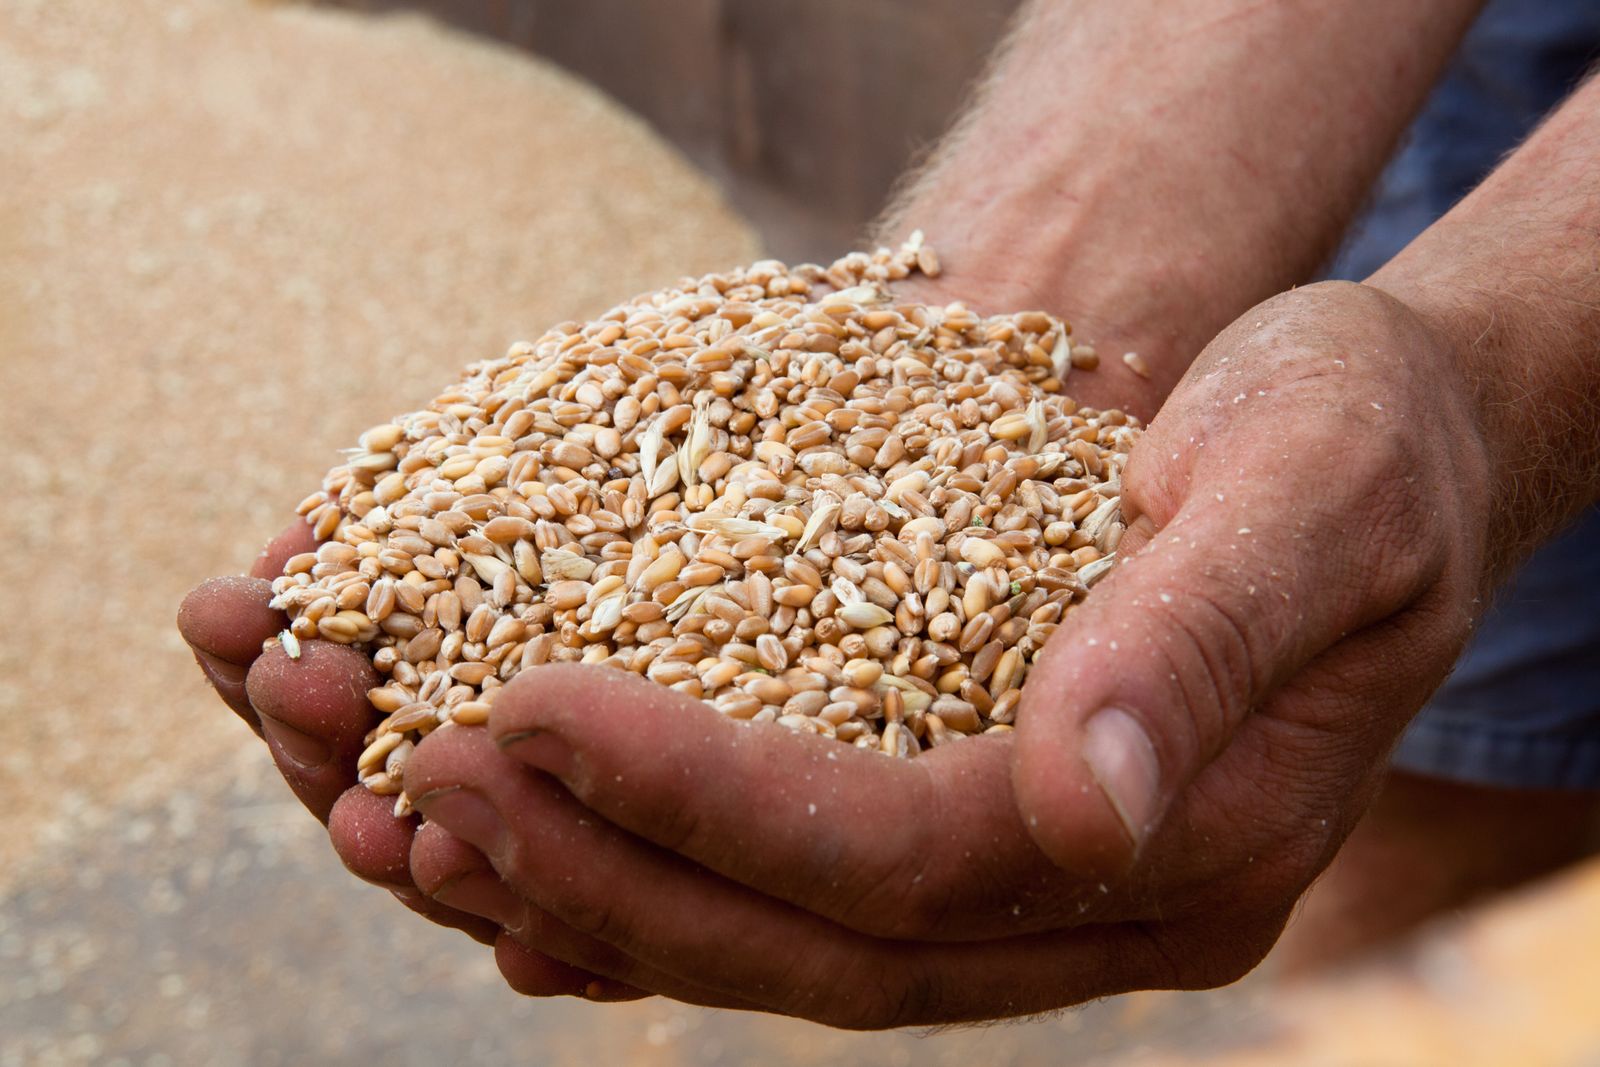 Local landrace grains, just before being crushed.